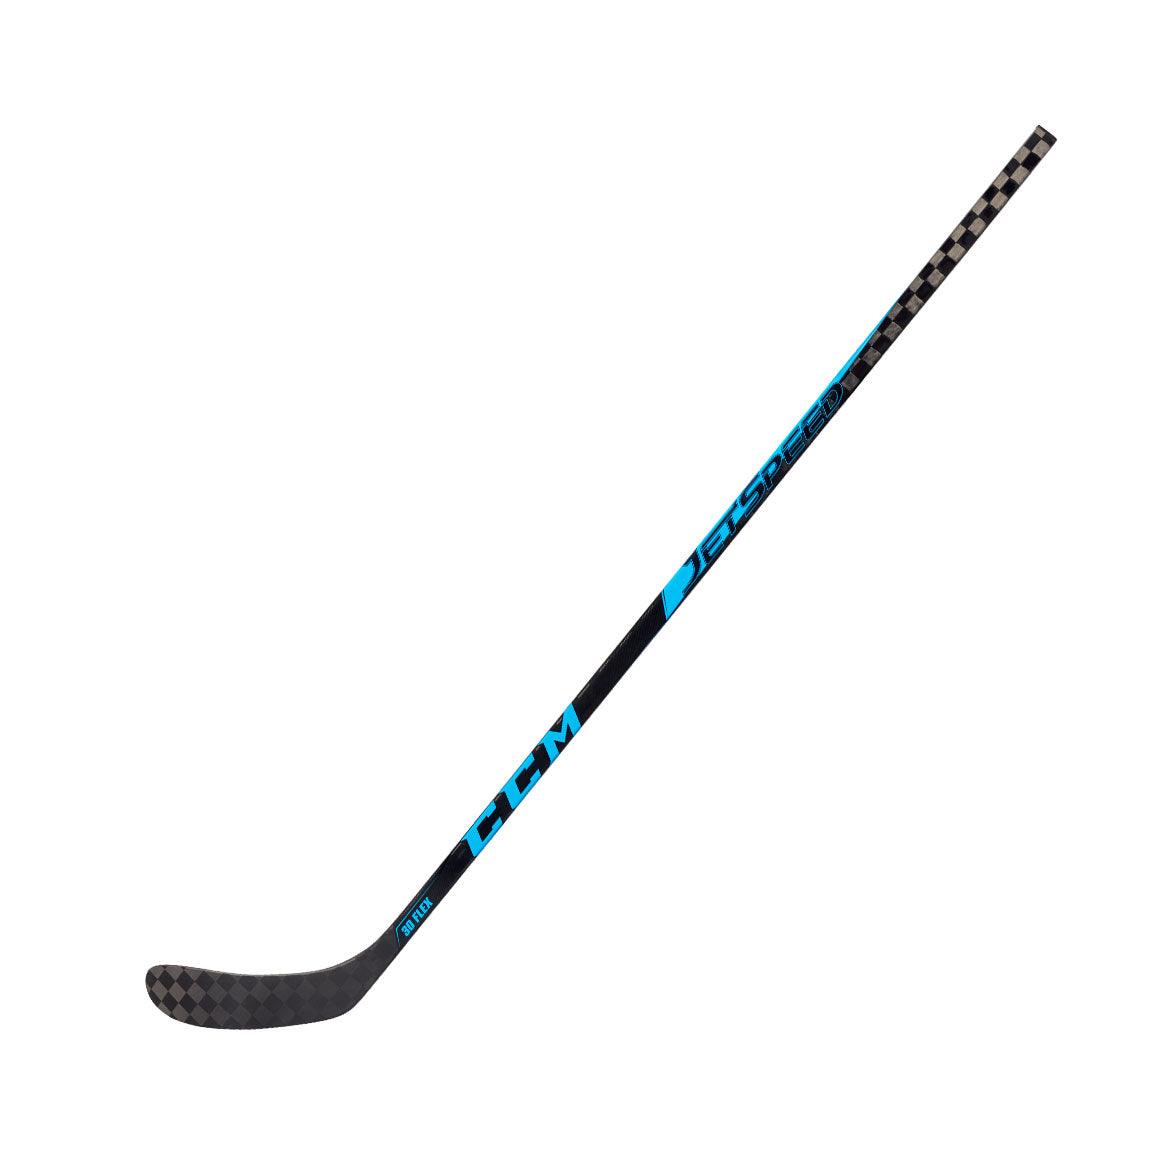 Jetspeed 30 Youth Hockey Stick - Youth - Sports Excellence